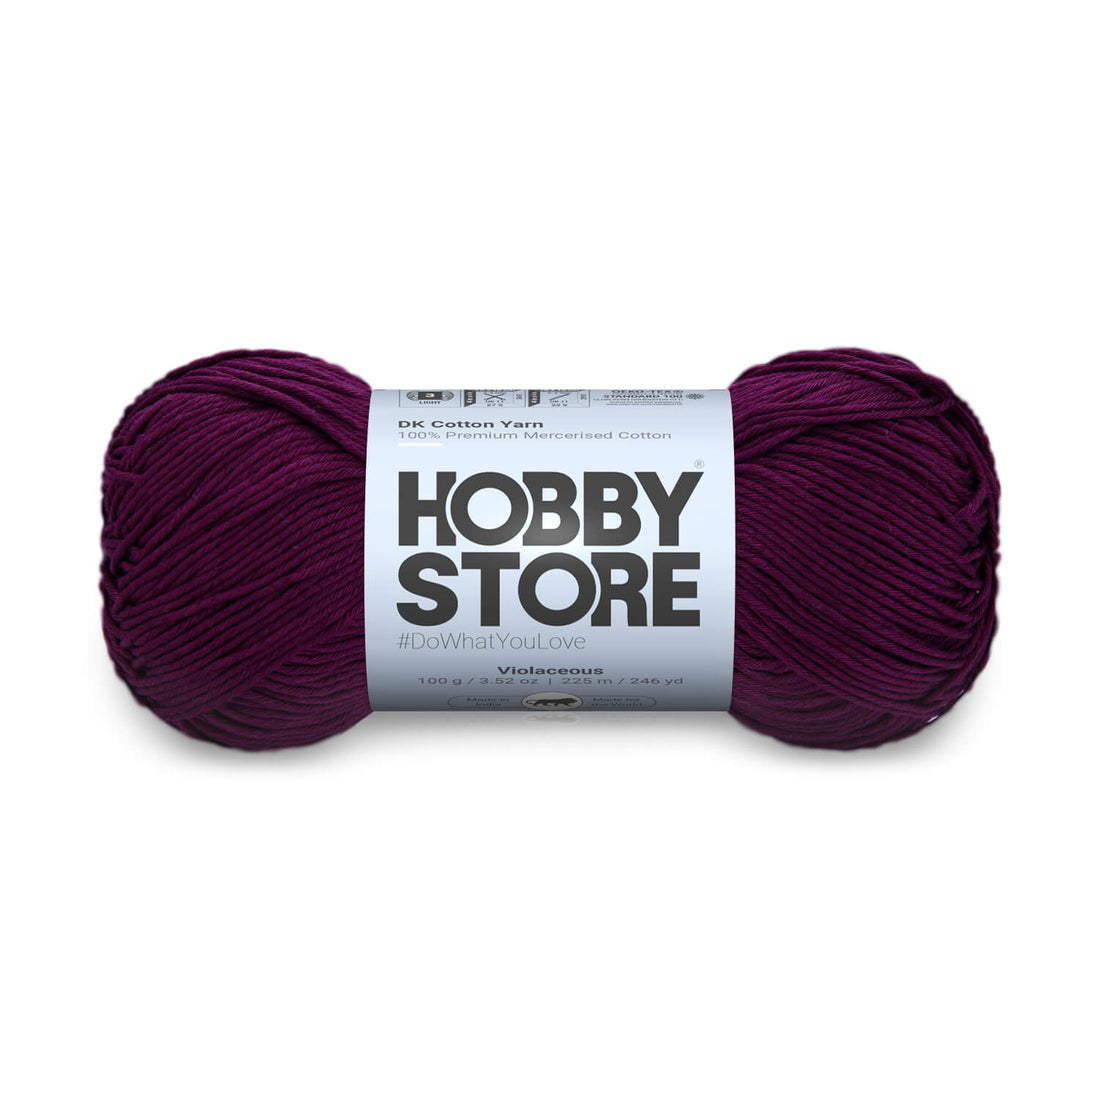 DK Mercerised Cotton Yarn by Hobby Store - Violaceous - 349